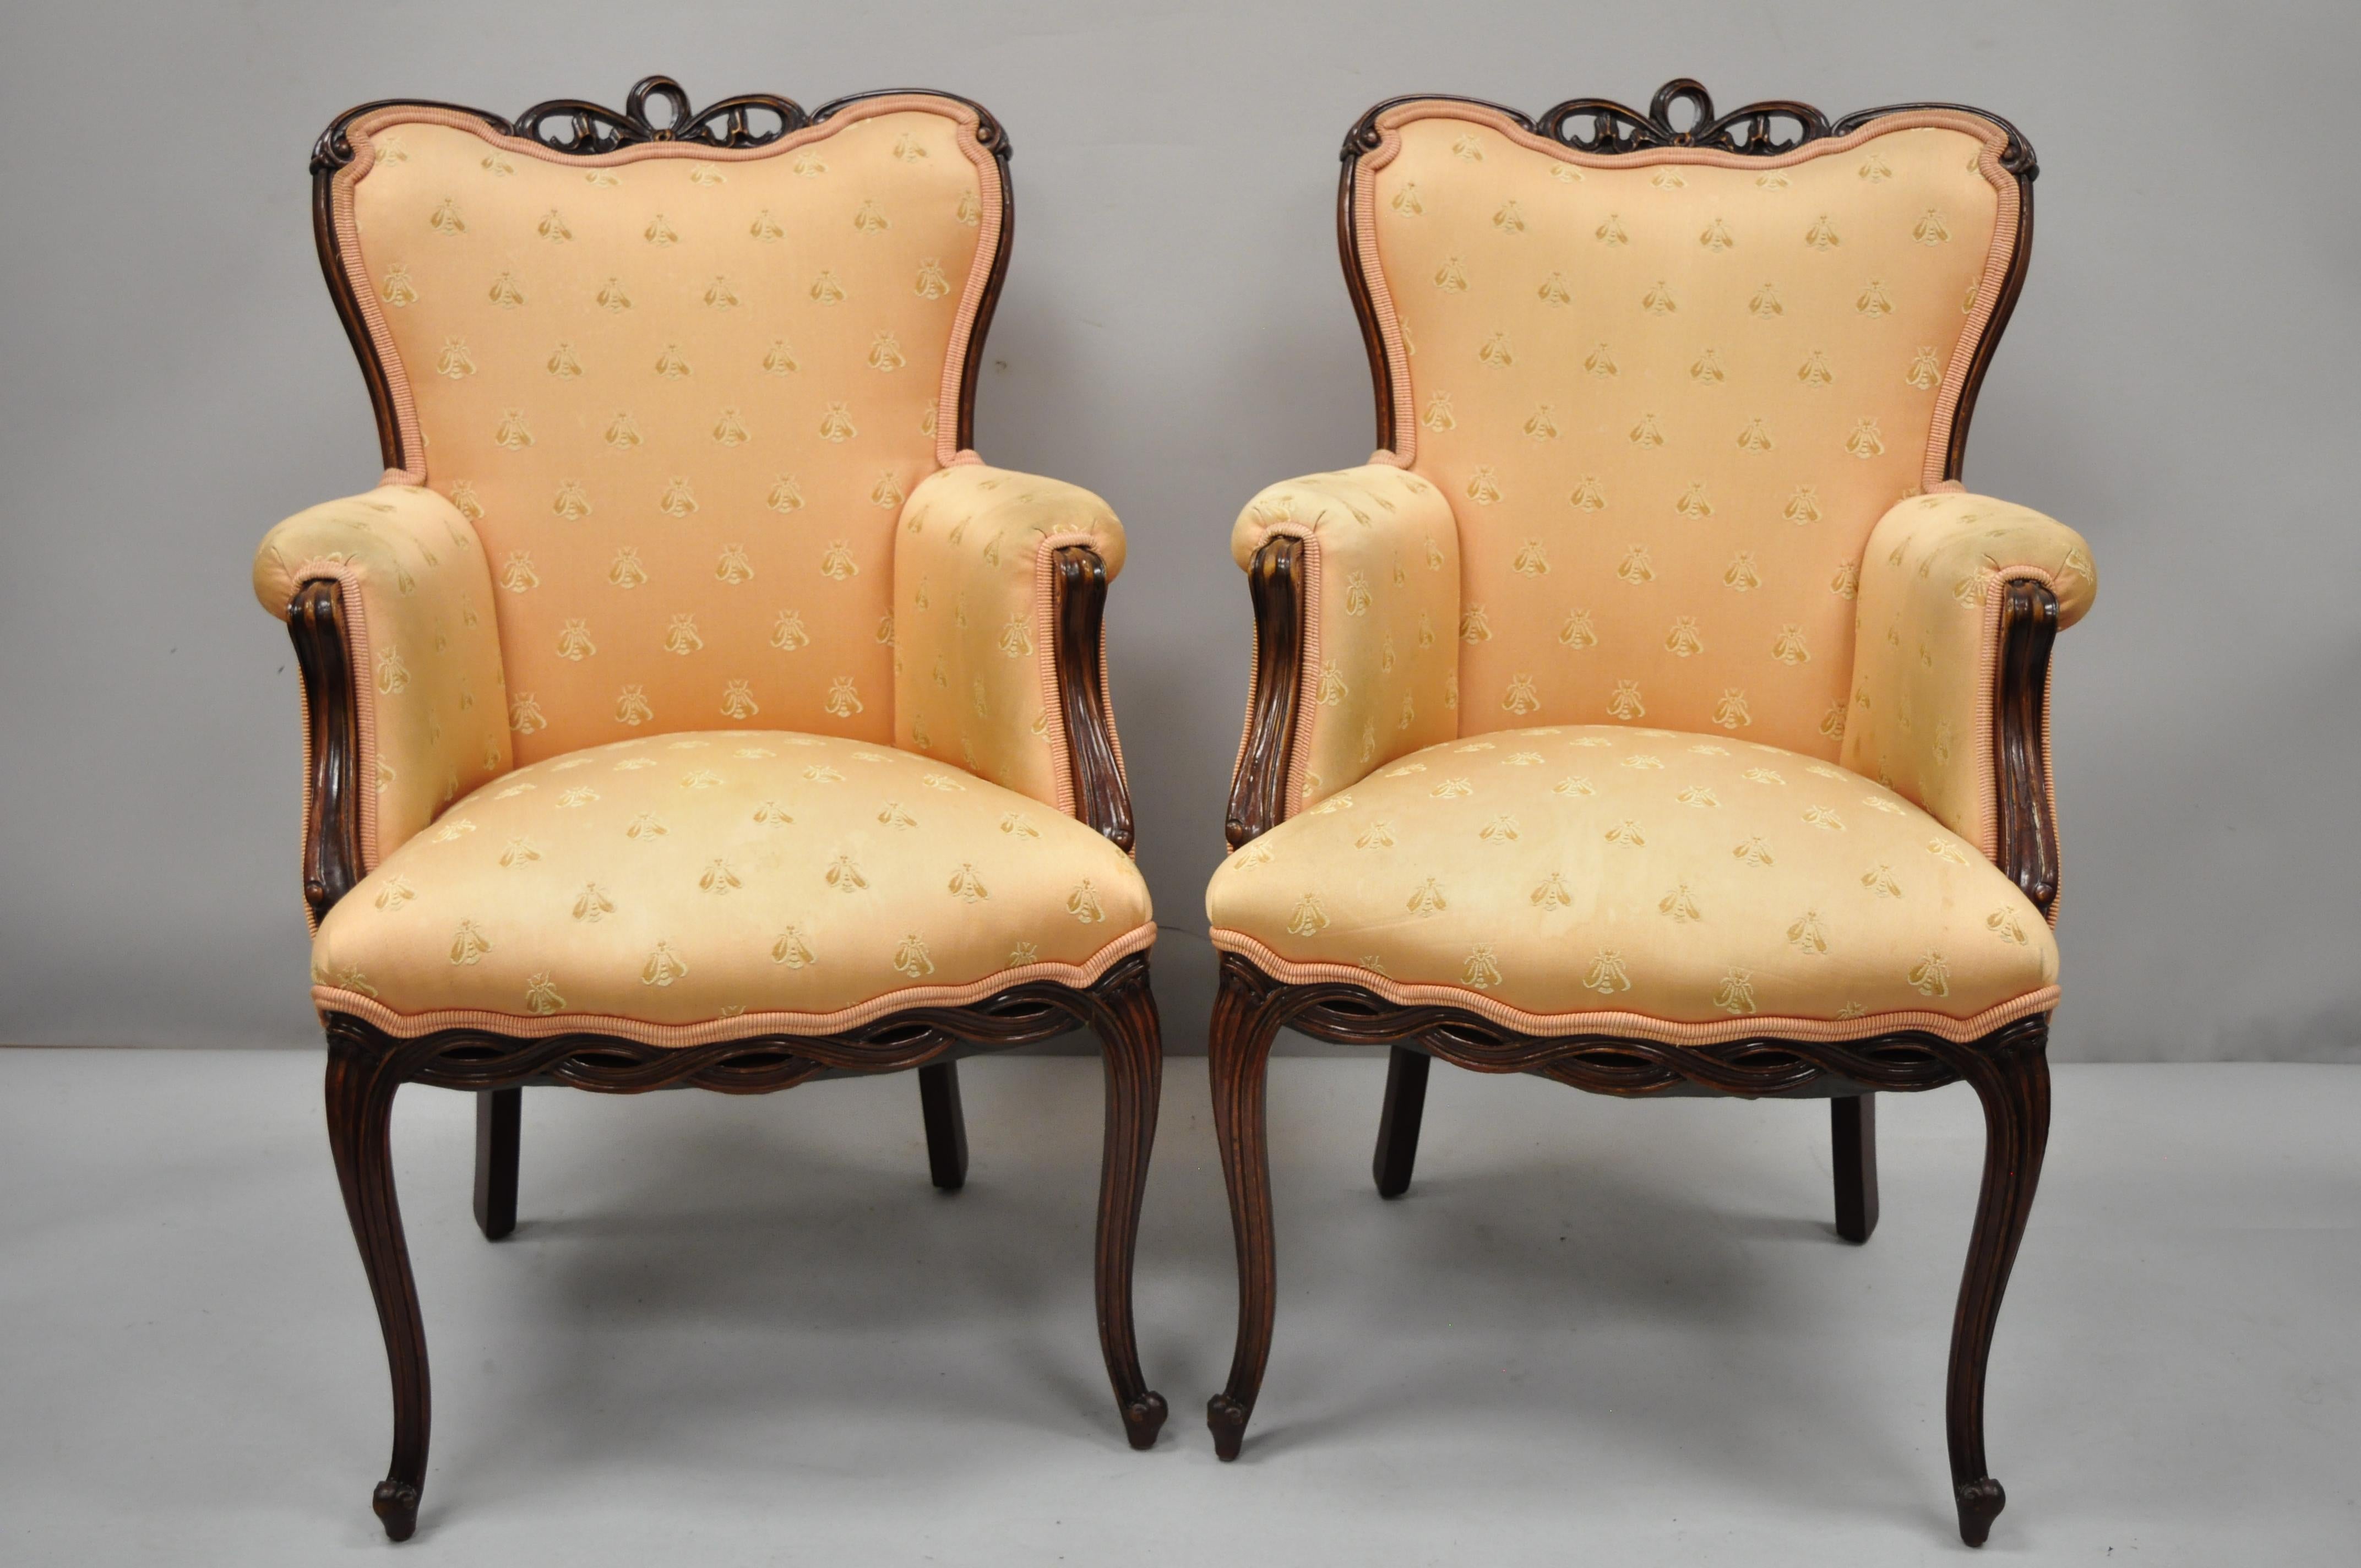 Pair of vintage French Hollywood Regency Victorian style upholstered fireside lounge armchairs. Items feature ribbon / bow carved upper rail, pretzel carved lower rail, solid wood frame, upholstered armrests, cabriole legs, mid-20th century.